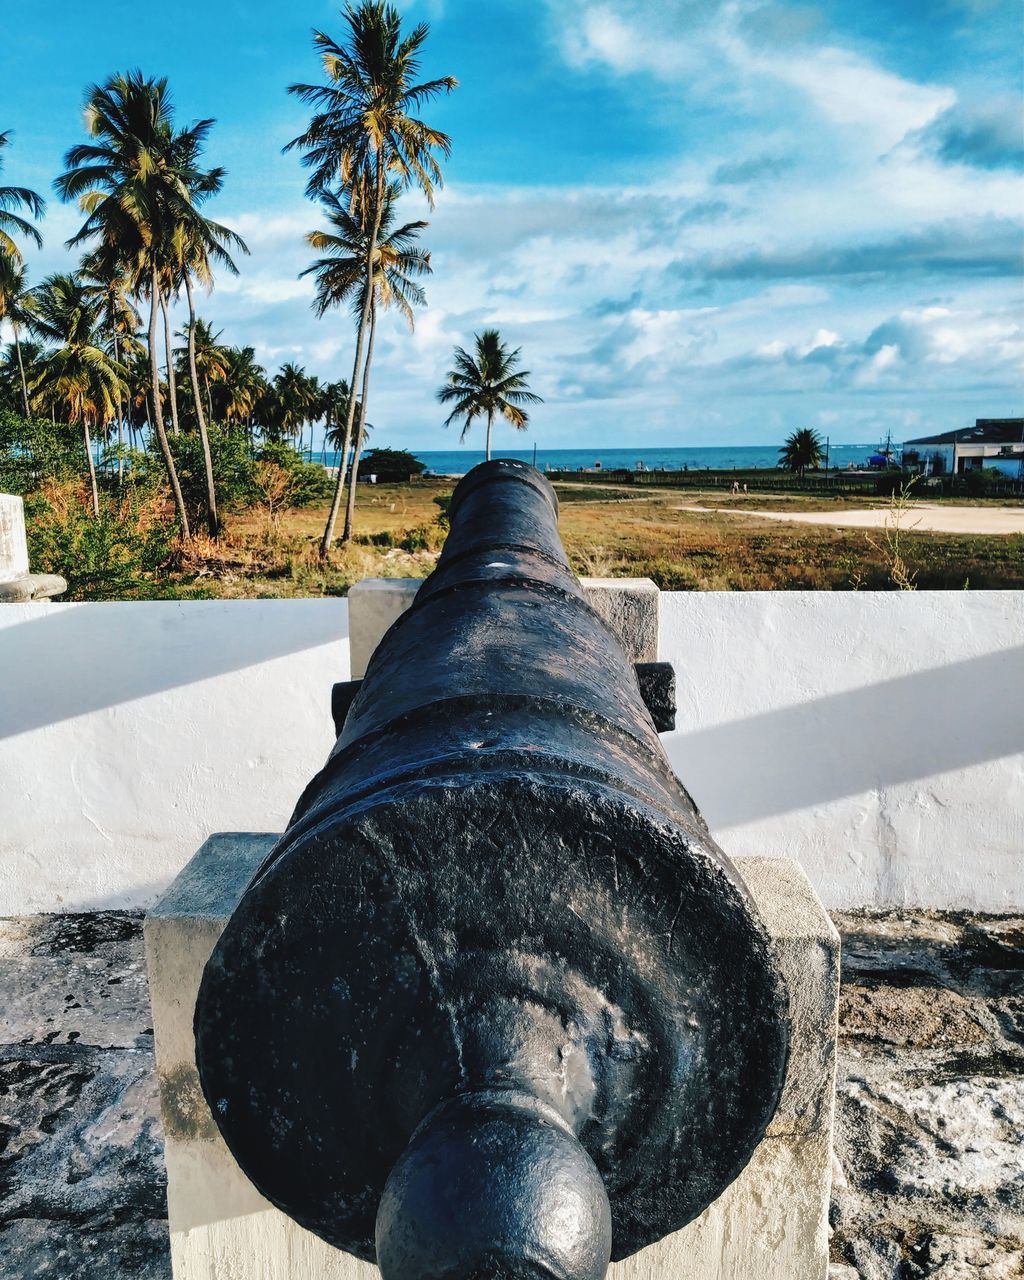 sky, palm tree, tree, plant, tropical climate, weapon, nature, cannon, cloud - sky, no people, day, conflict, metal, outdoors, war, water, fighting, architecture, land, history, wheel, coconut palm tree